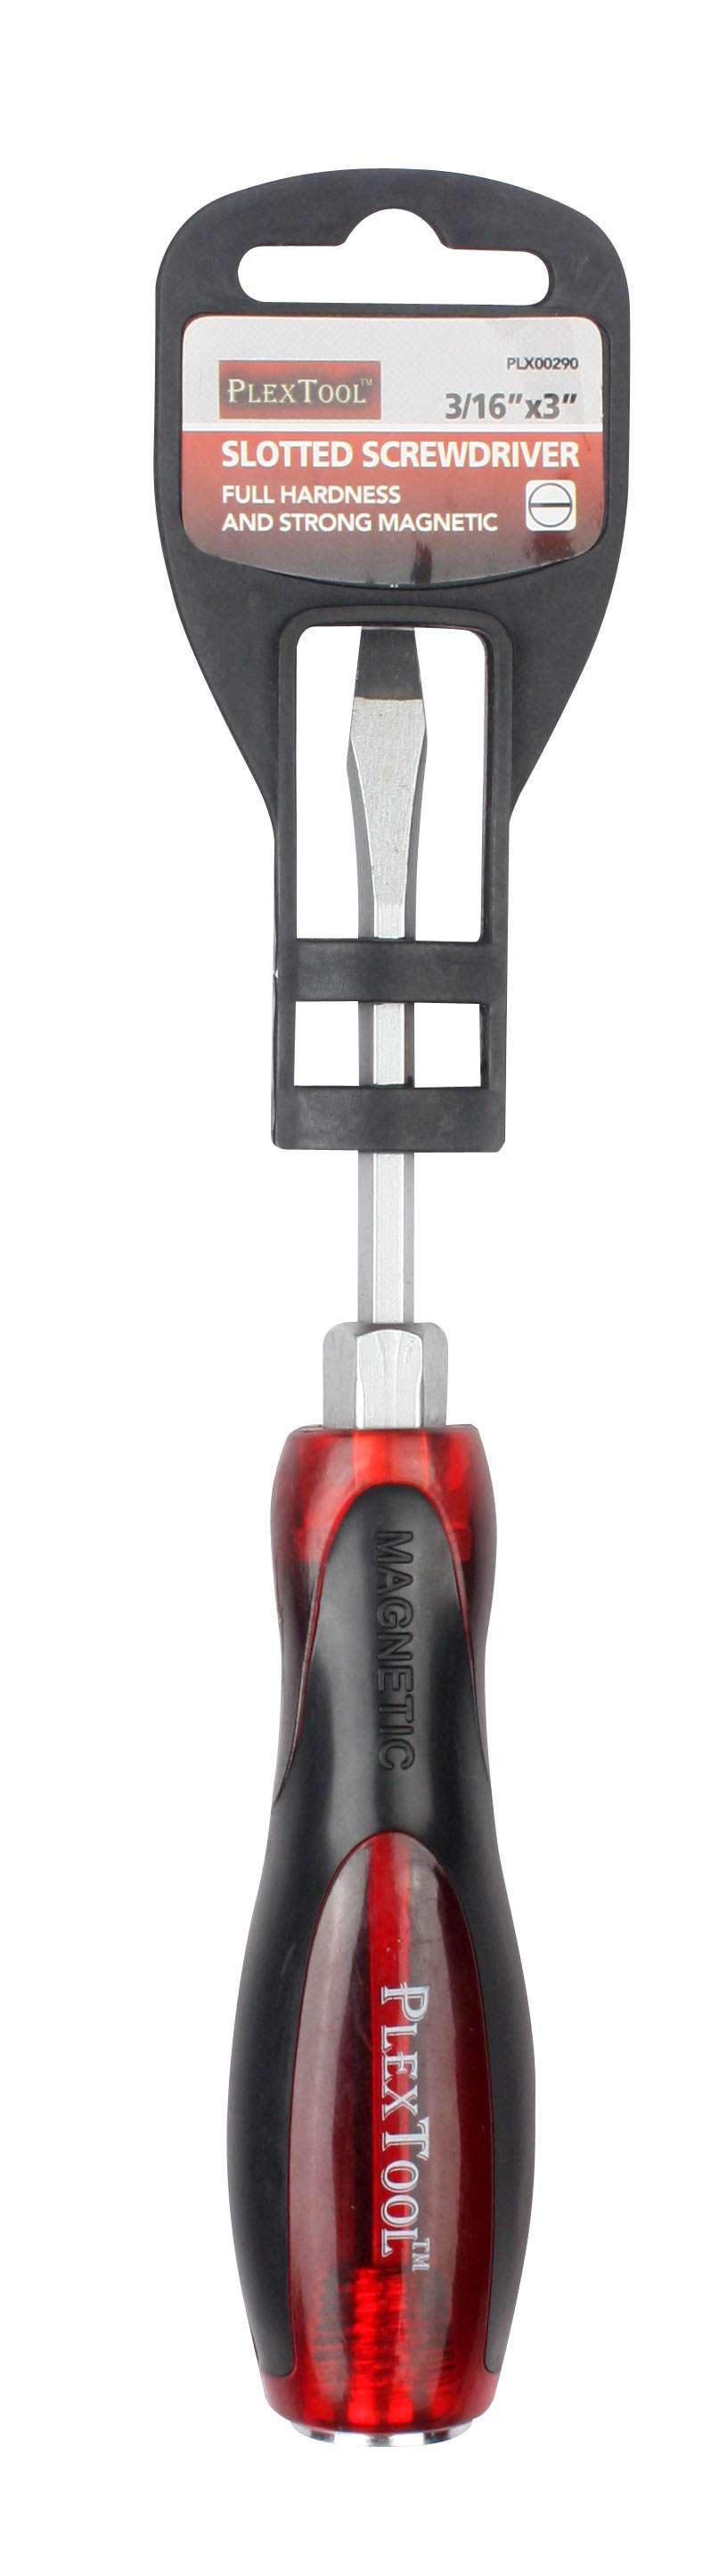 3"L x 3/16" Slotted Full Hardness Strong Magnetic Screwdriver - 1